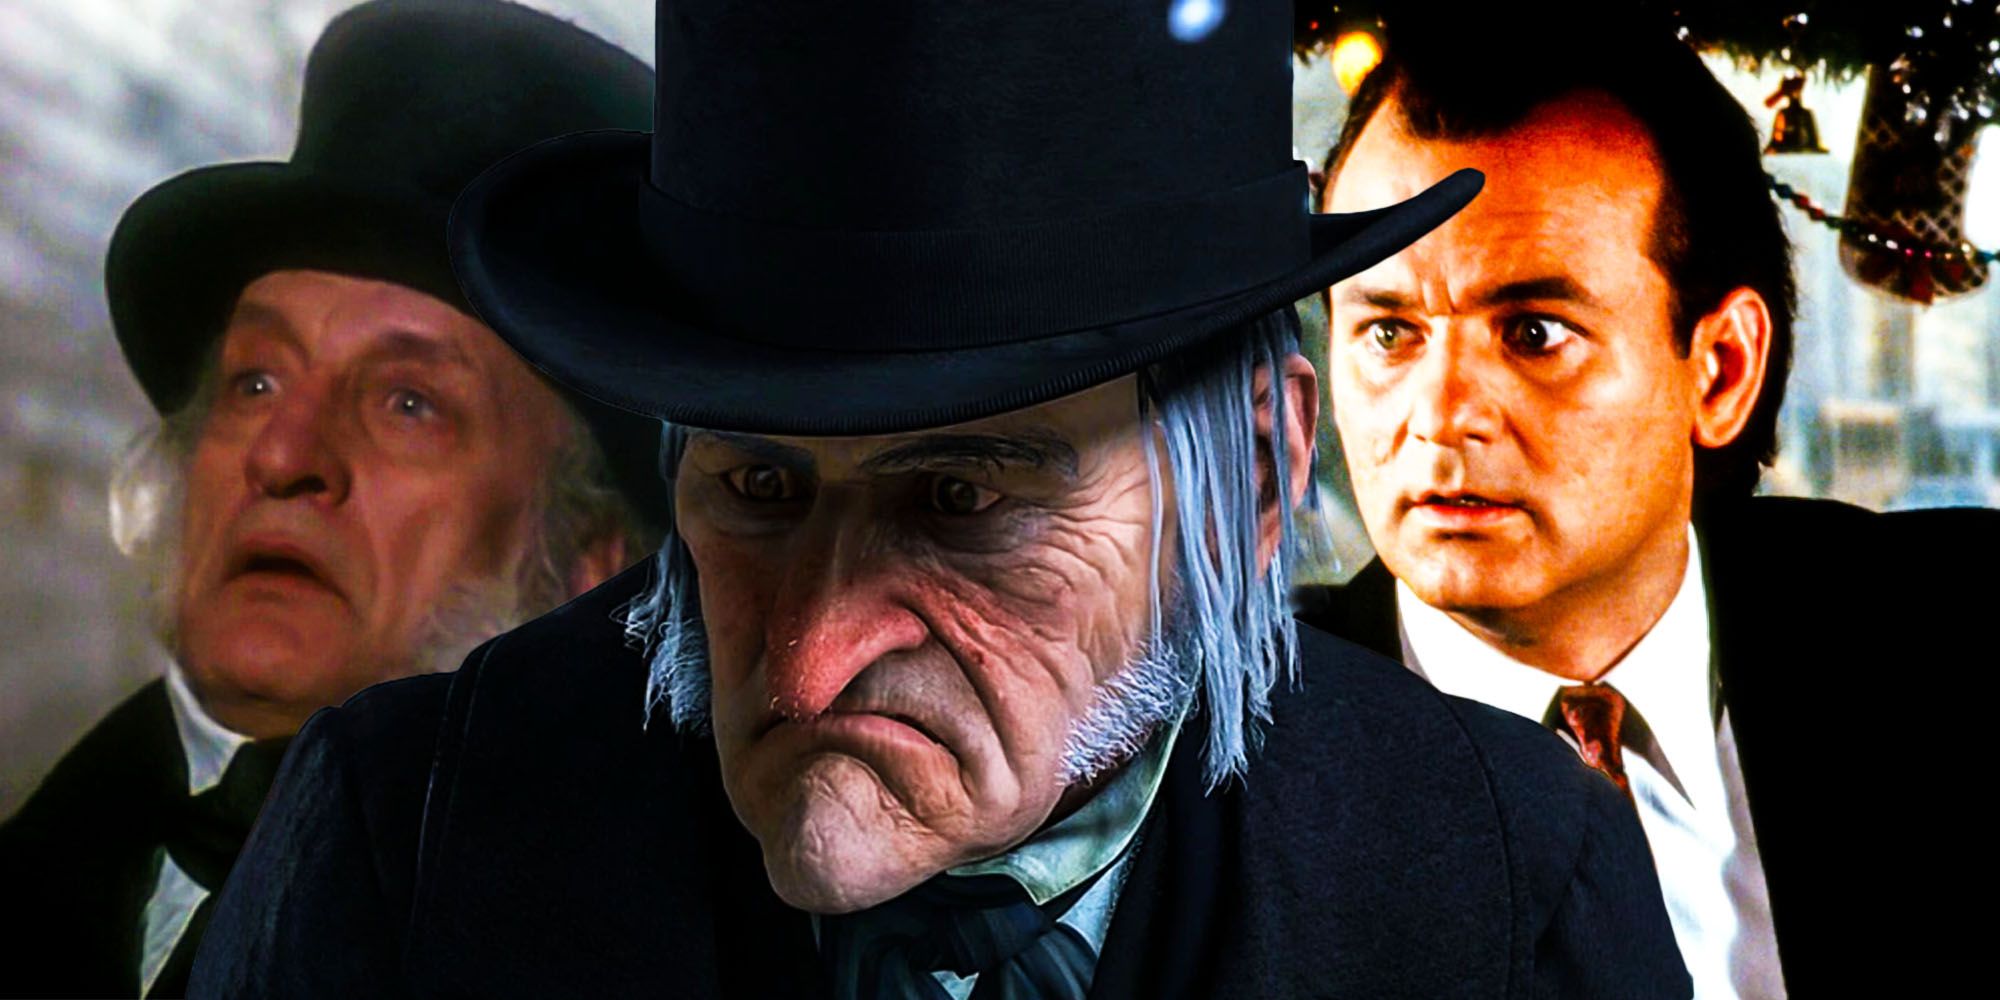 The 11 Best Movie Adaptations Of A Christmas Carol Ranked